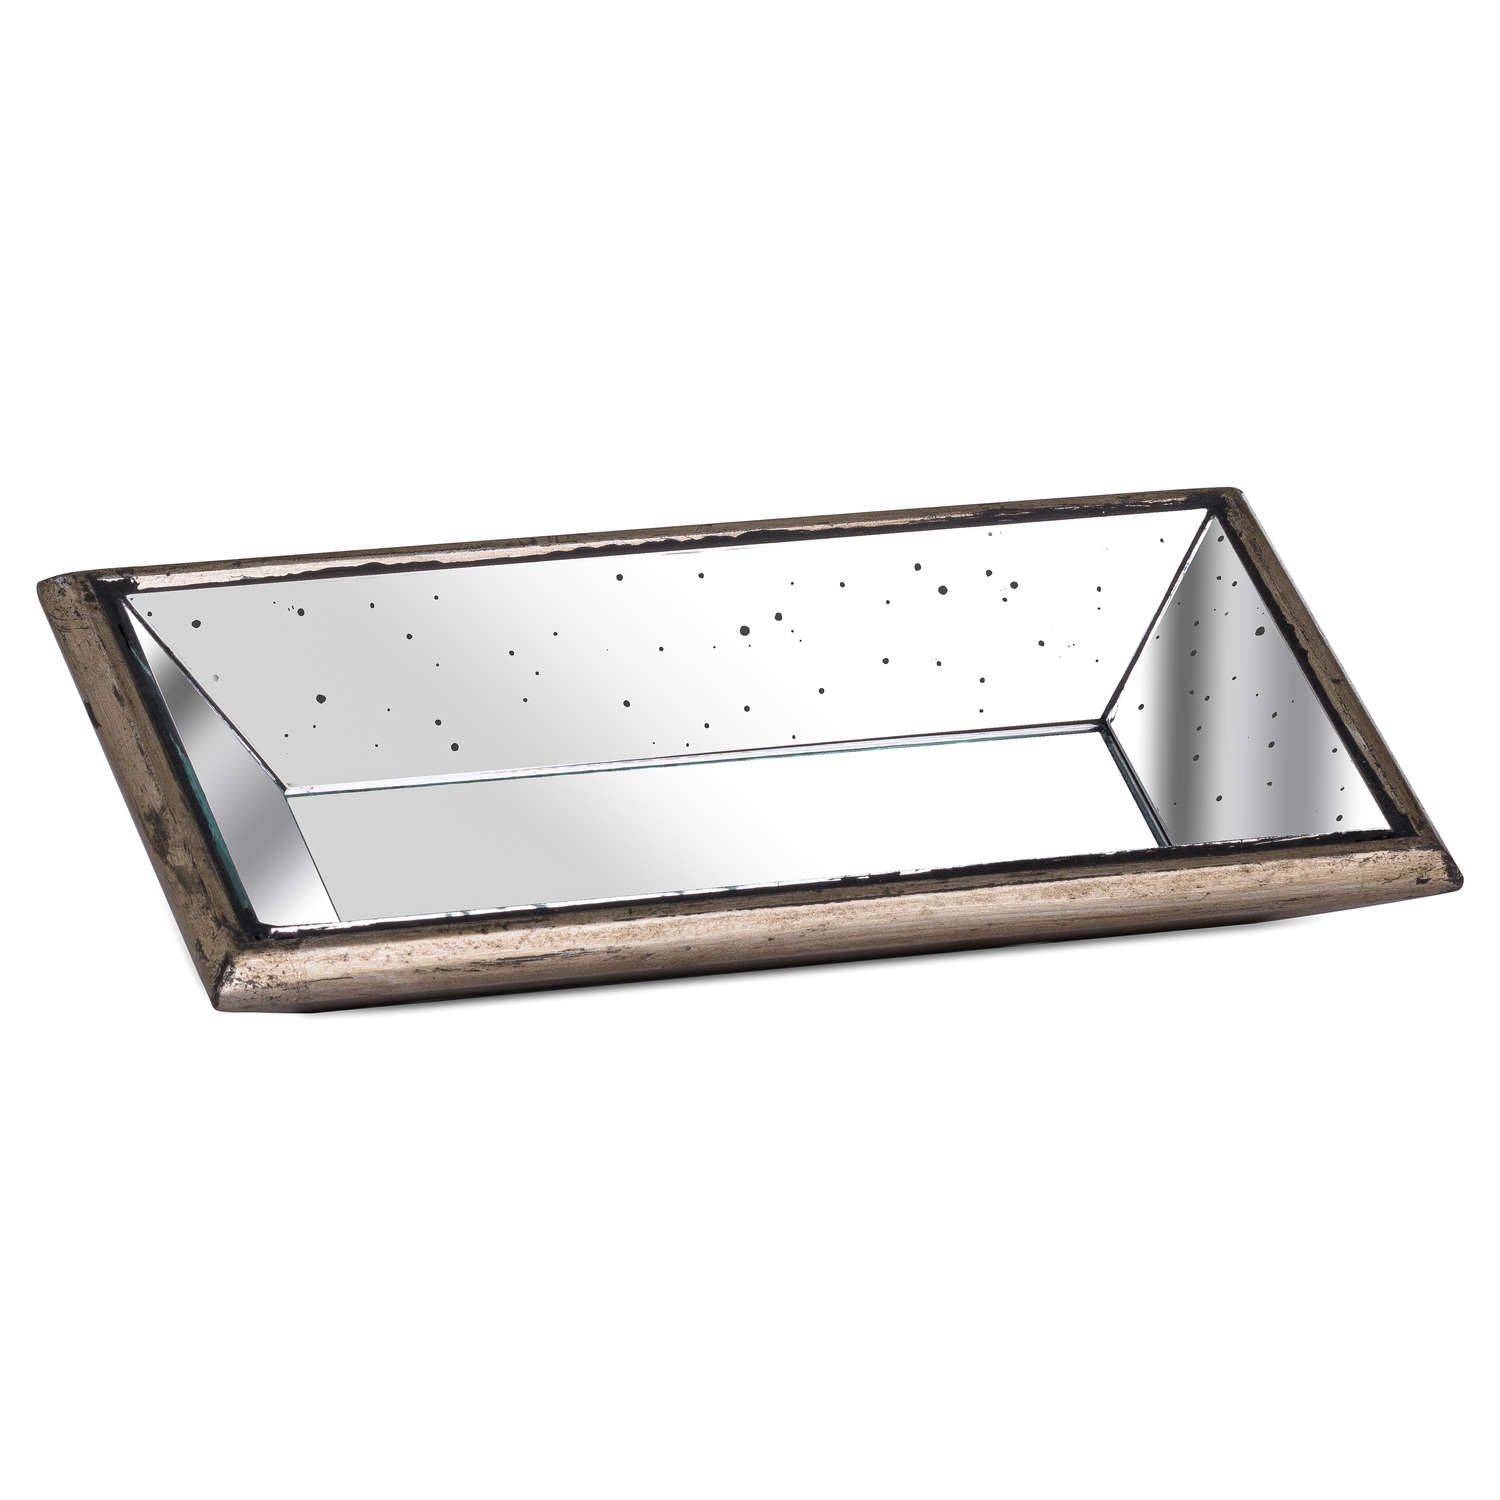 Astor Distressed Mirrored Display Tray With Wooden Detailing - Image 1